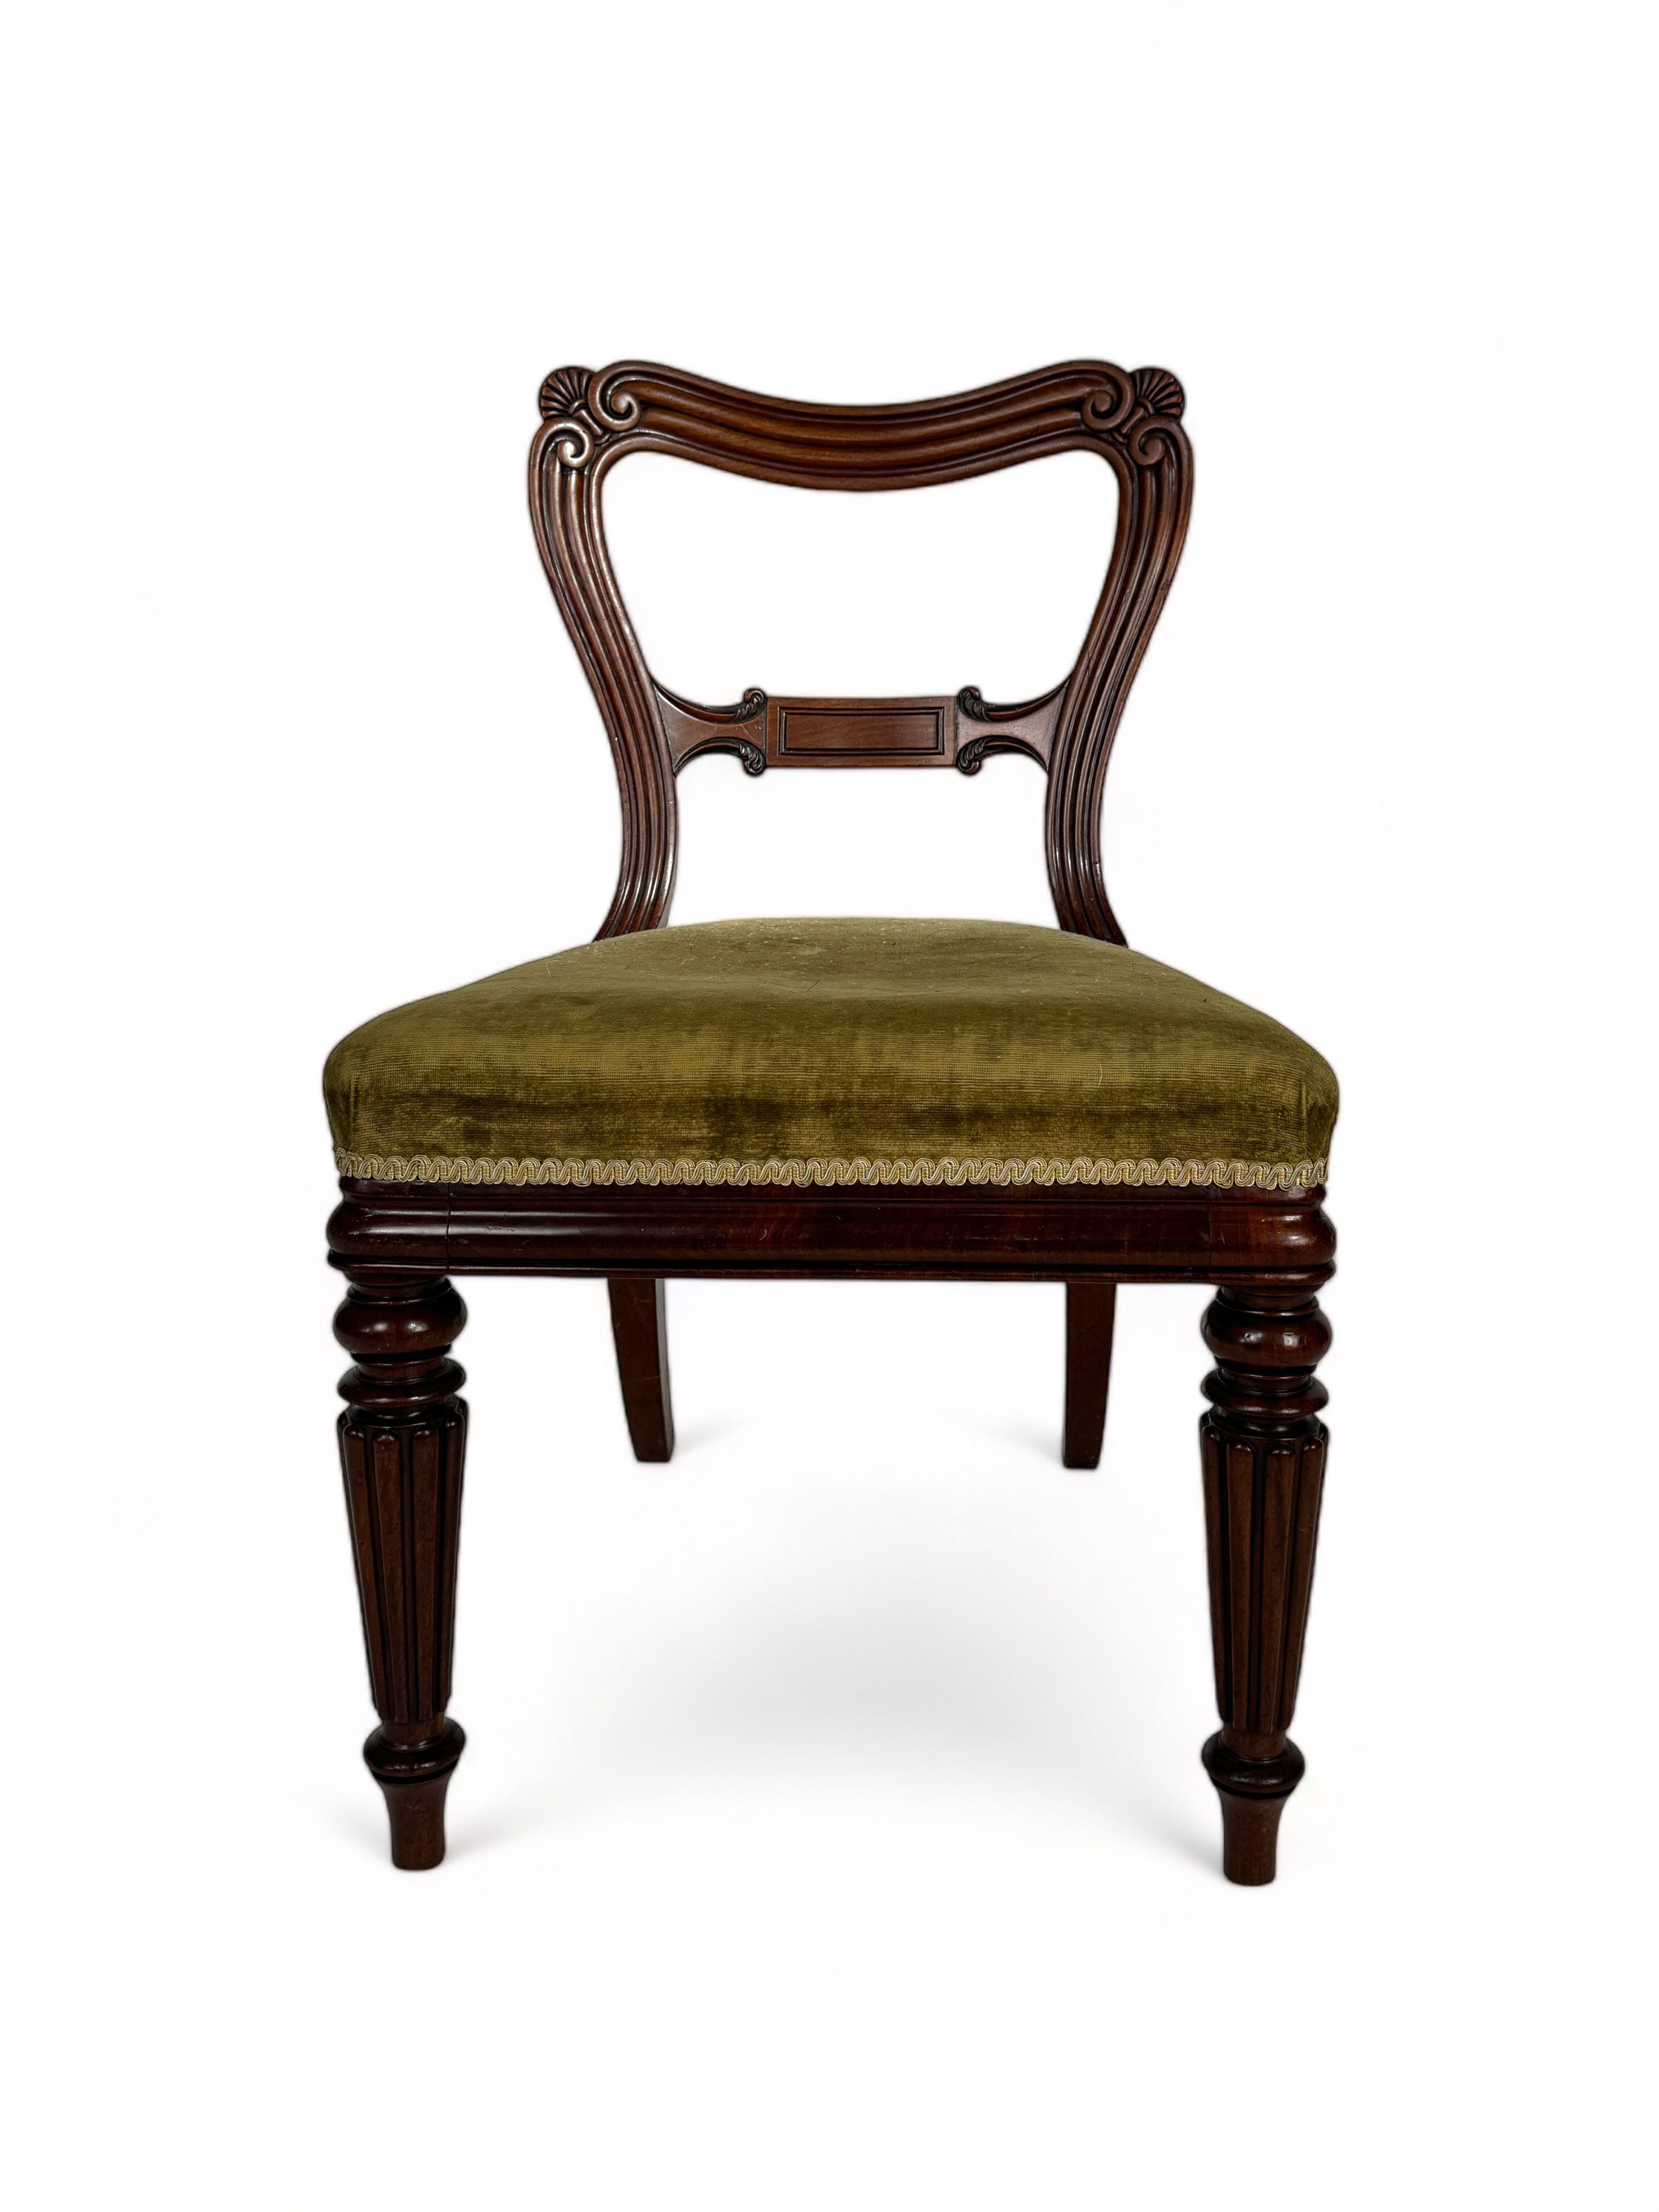 A George IV mahogany dining chair attributed to Gillows - Image 6 of 6